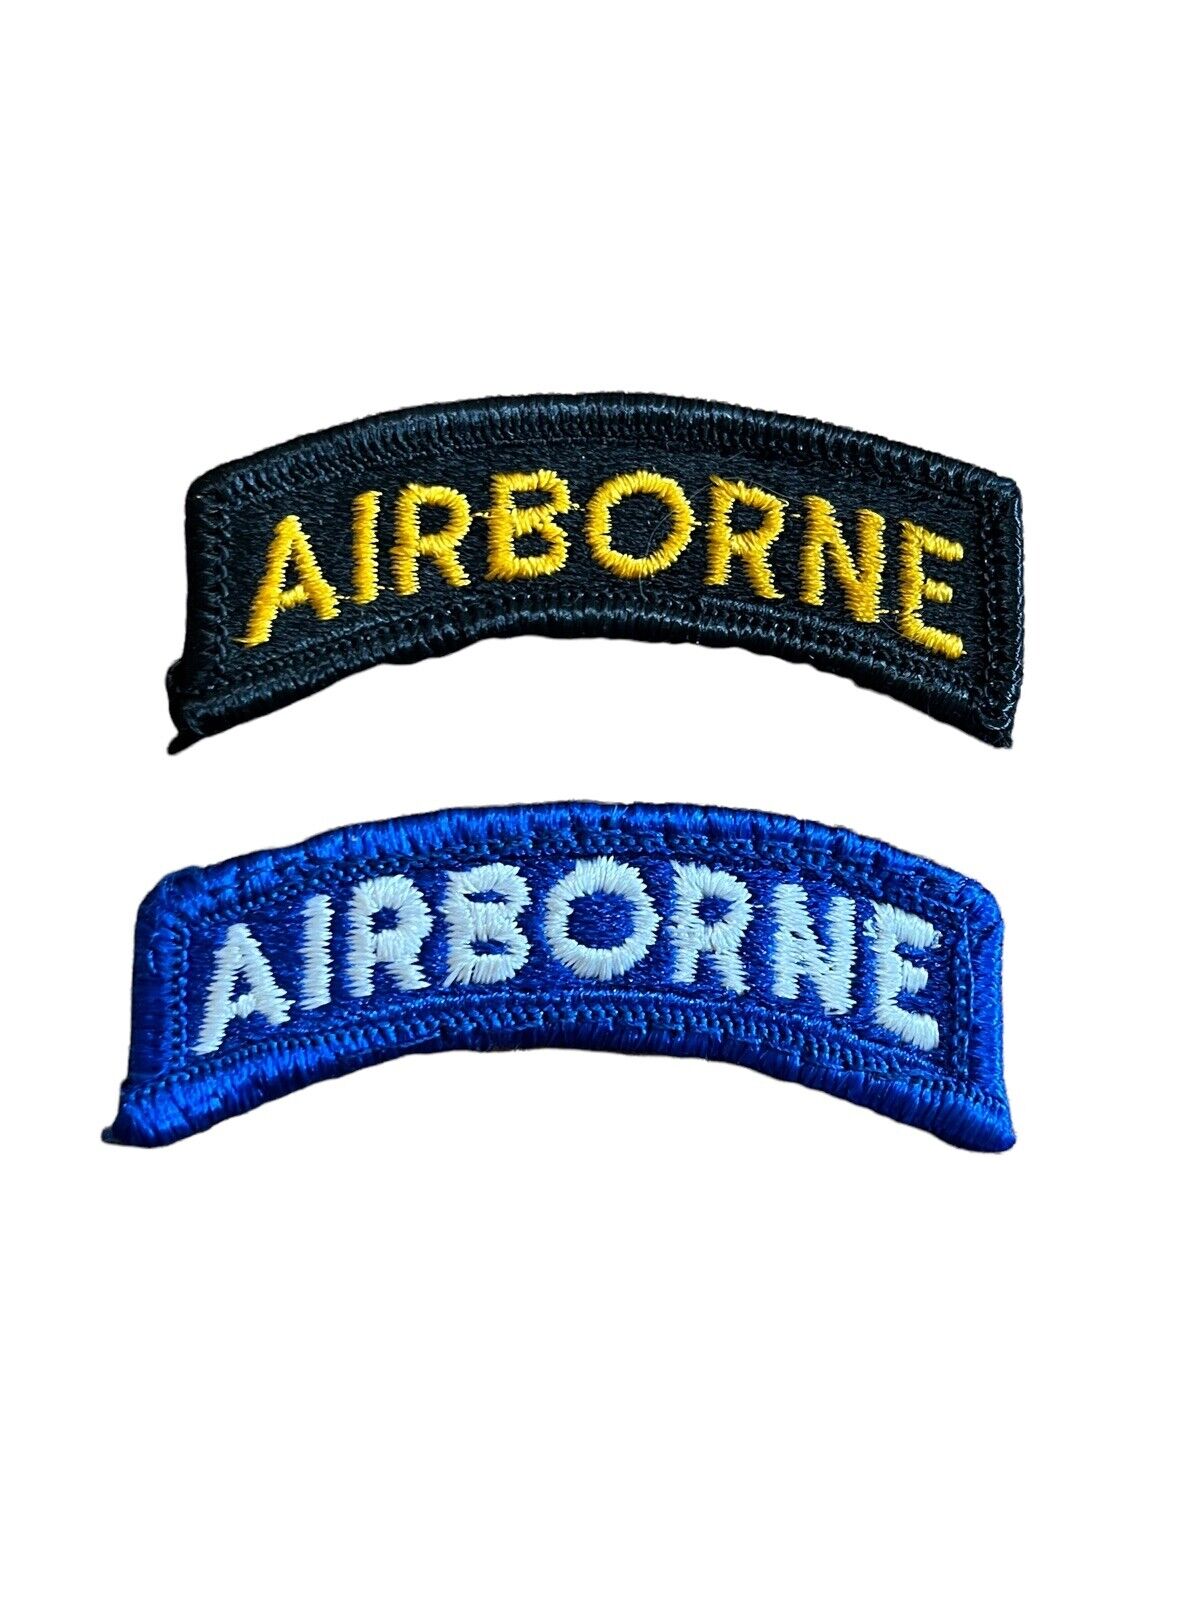 US Army Enlisted Private First Class A uniform Airborne Division